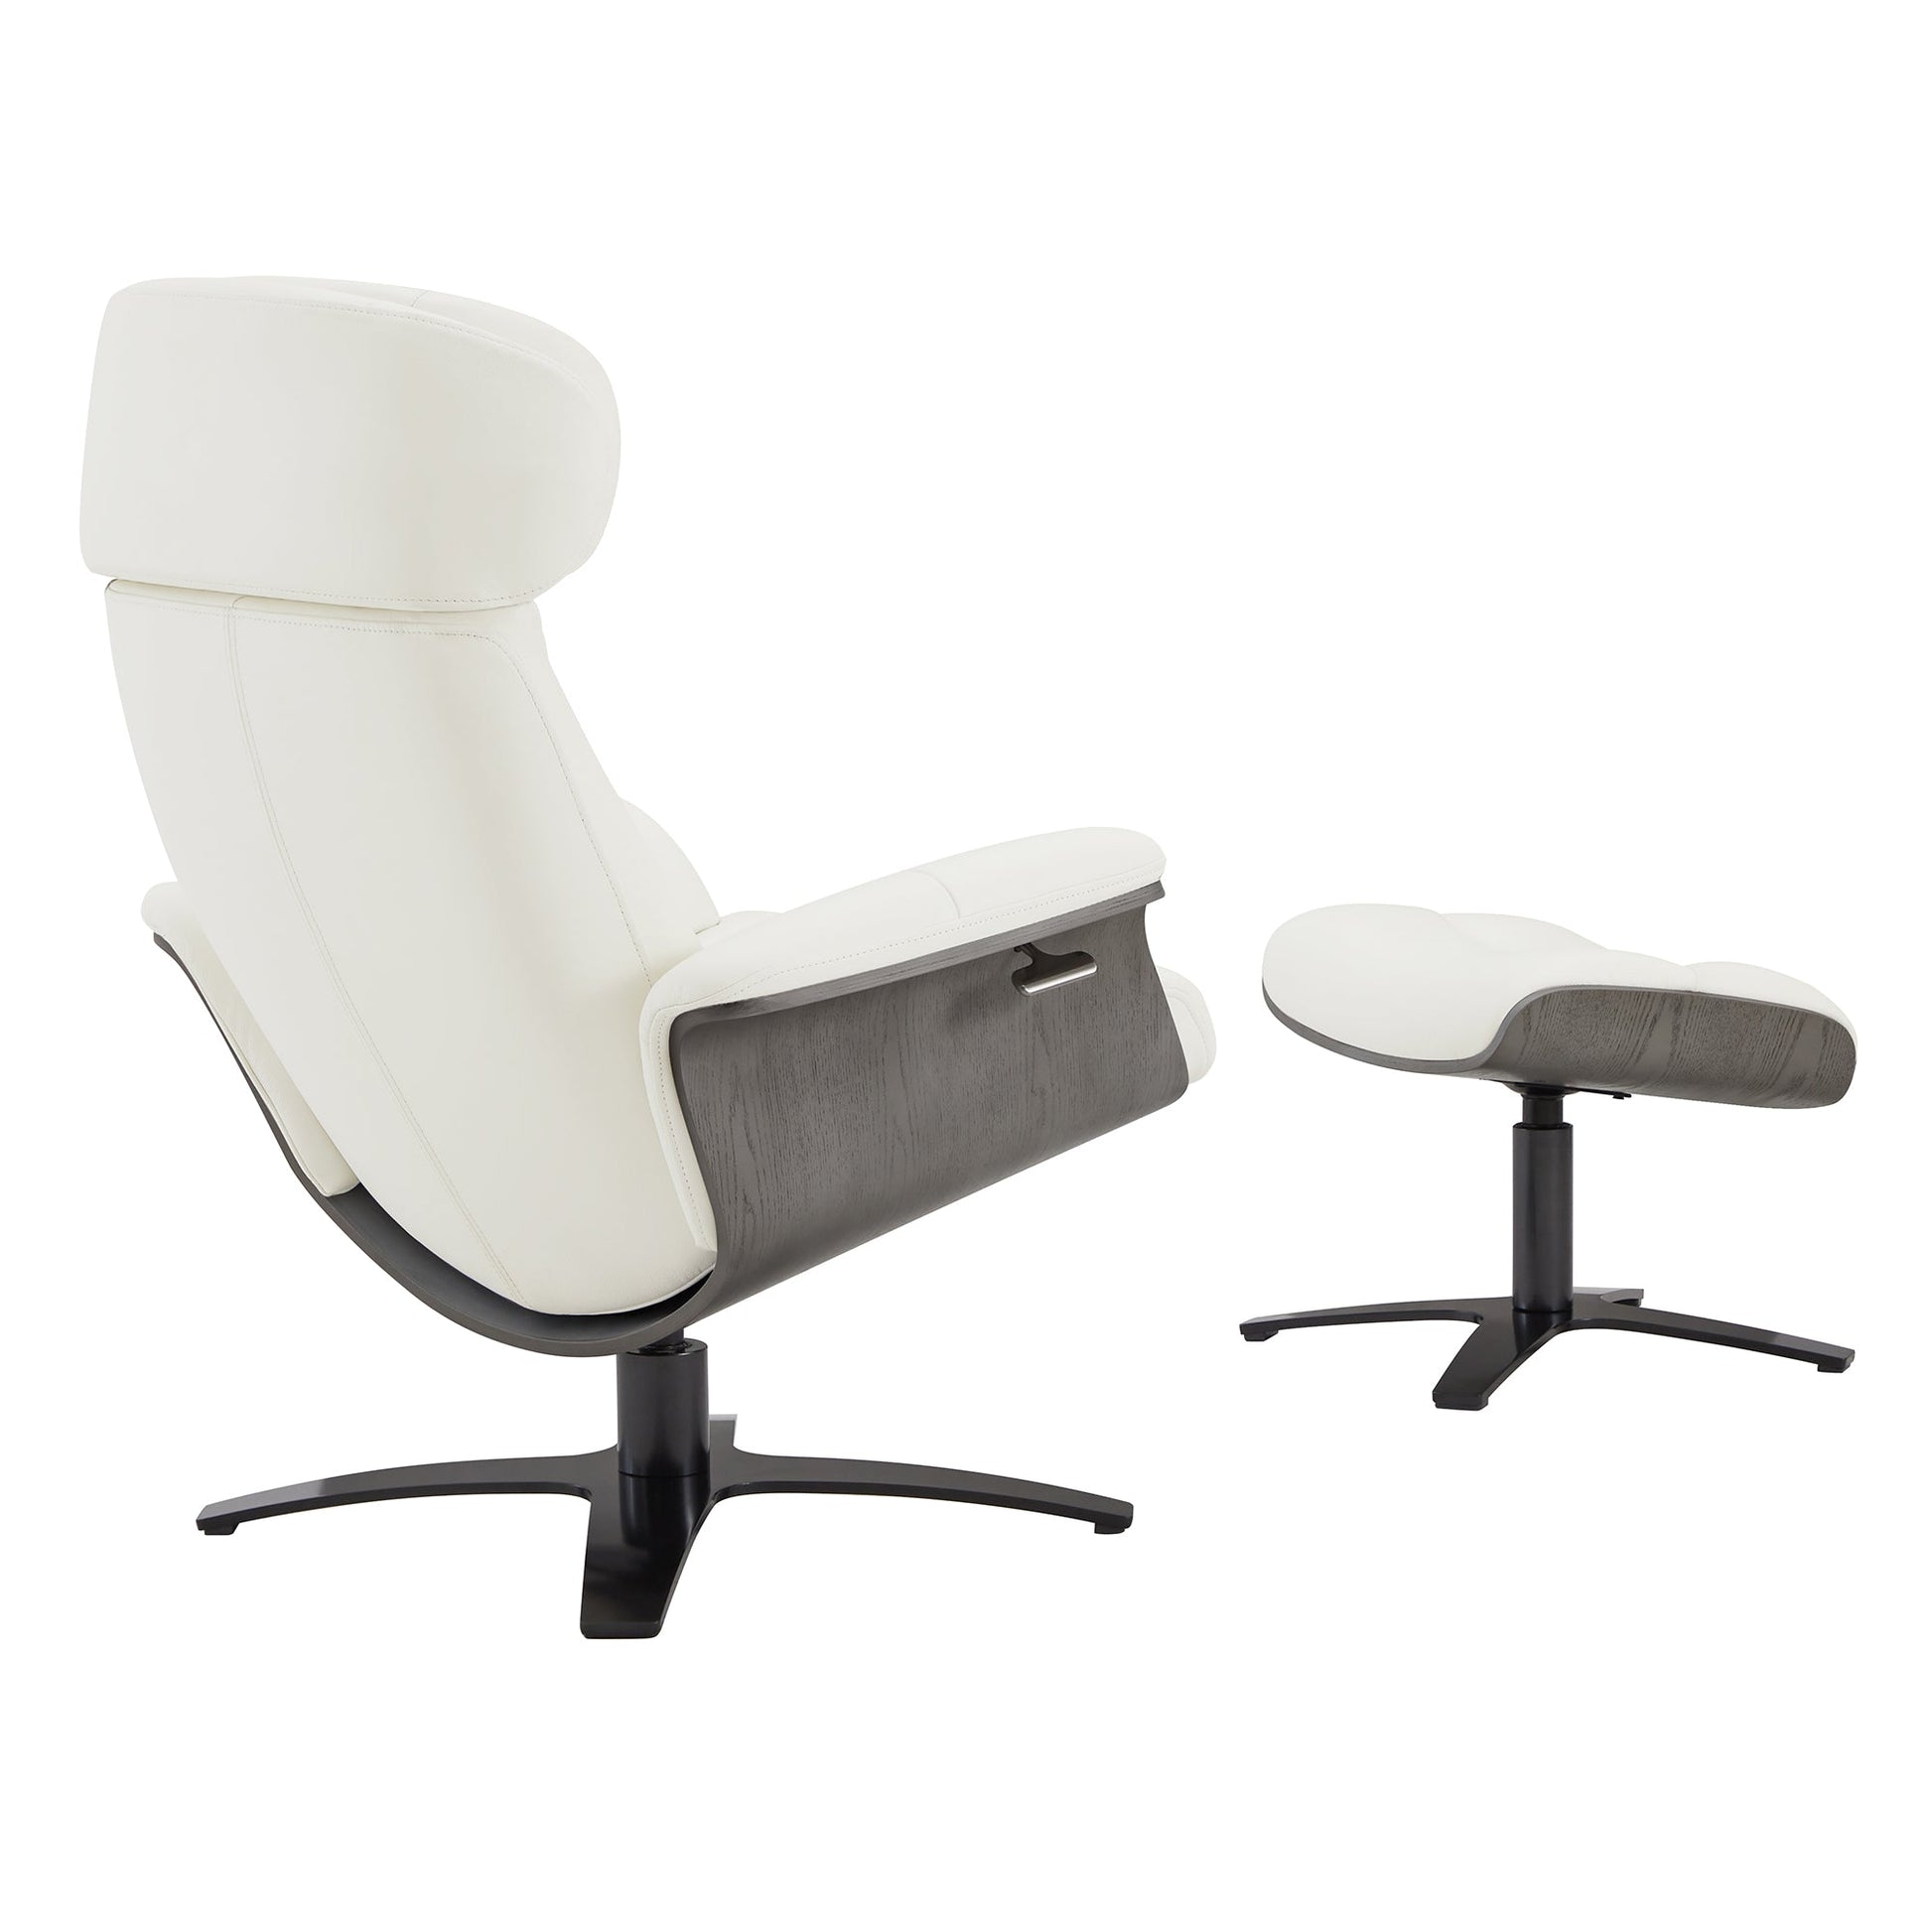 CHITA LIVING-Elvin Leather Recliner & Ottoman-Recliners-Genuine Top-grain Leather-White-